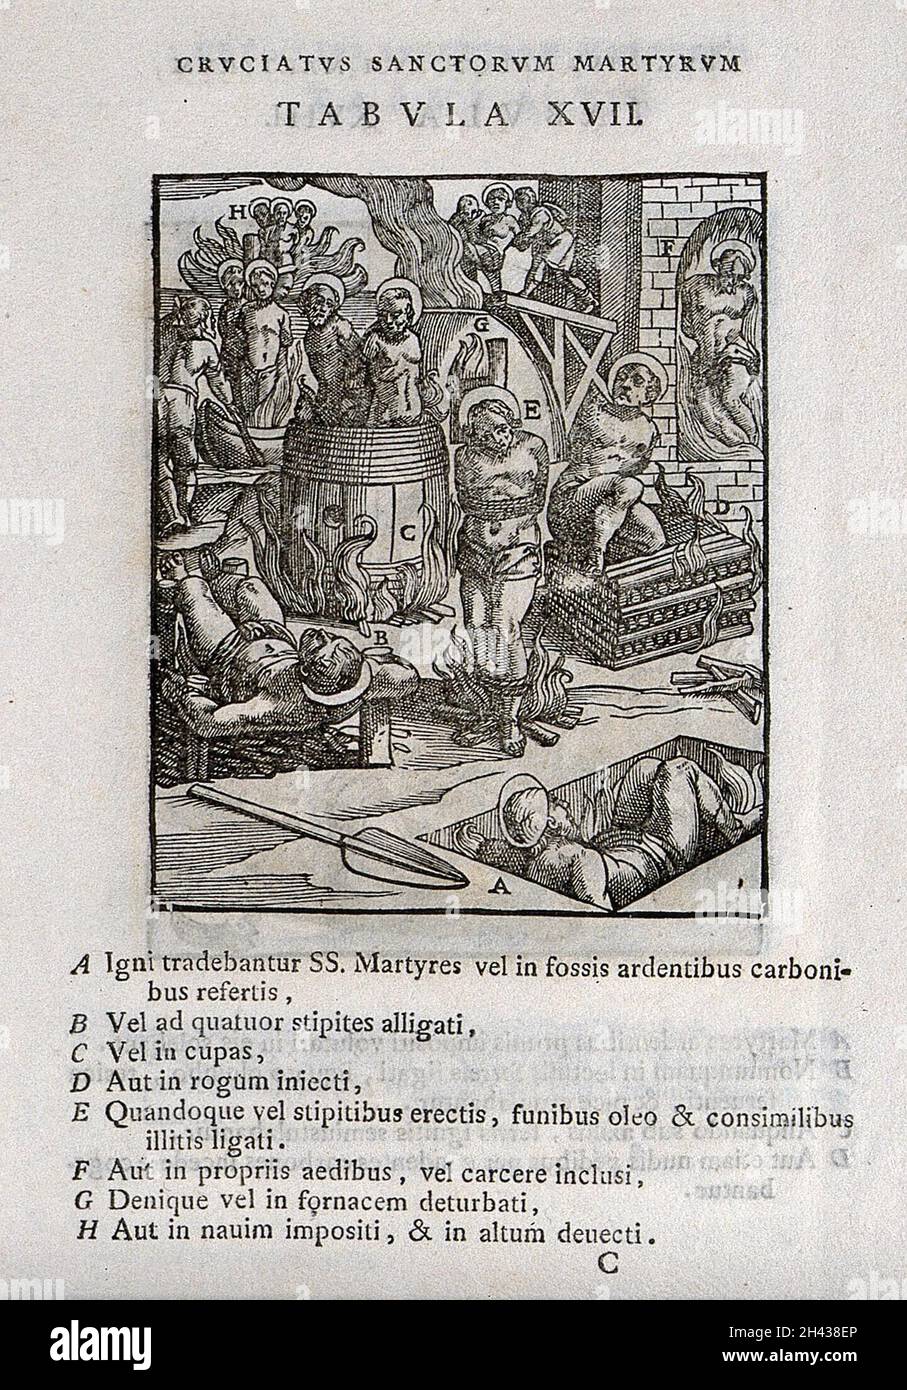 Martyrdom of male saints by various methods. Woodcut. Stock Photo